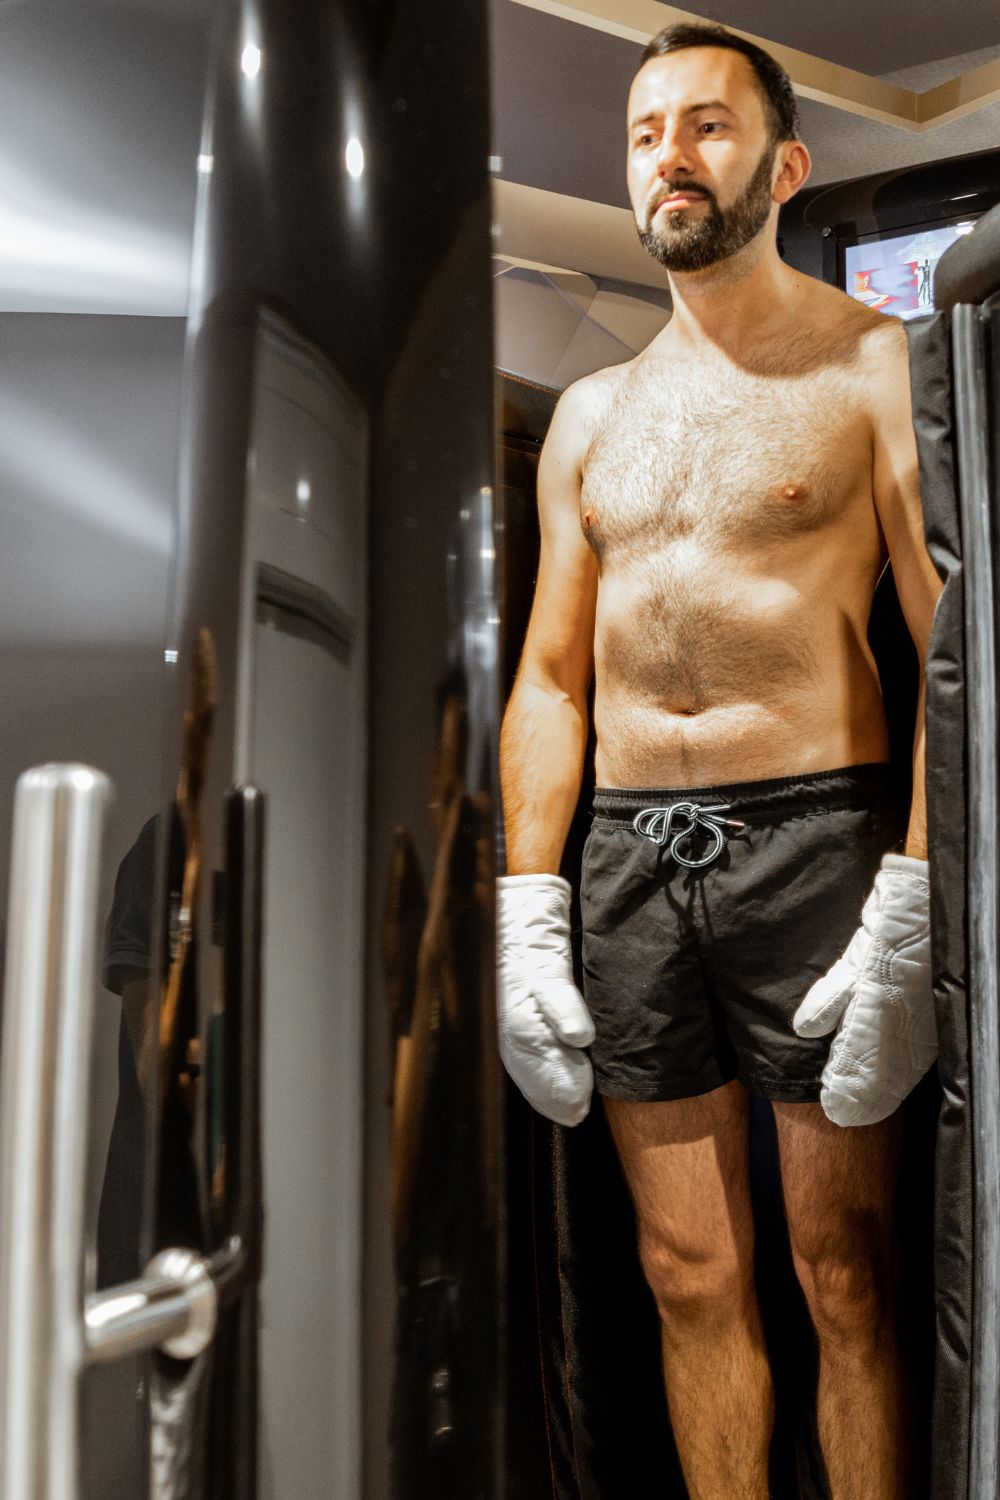 Man Taking a Cryotherapy Treatment